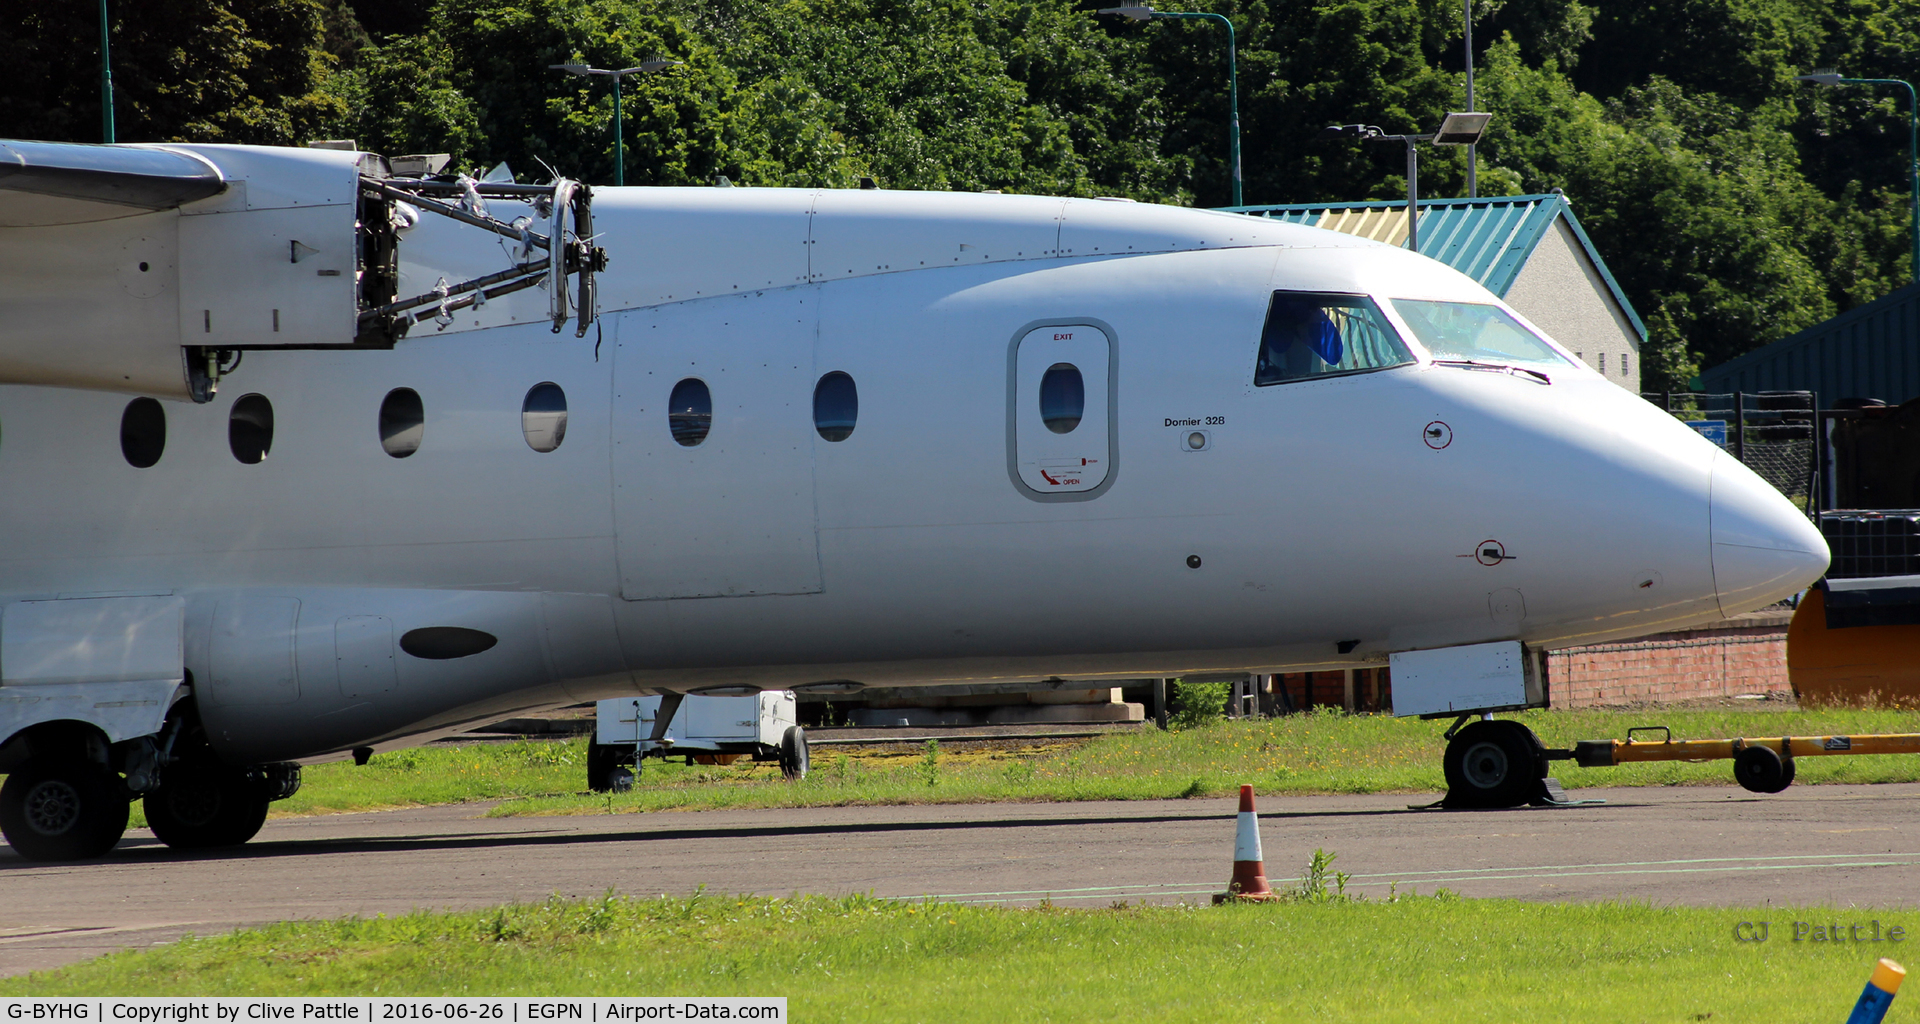 G-BYHG, 1998 Dornier 328-100 C/N 3098, Sitting engineless at the Loganair/Flybe maintenance facility at Dundee Riverside Airport EGPN